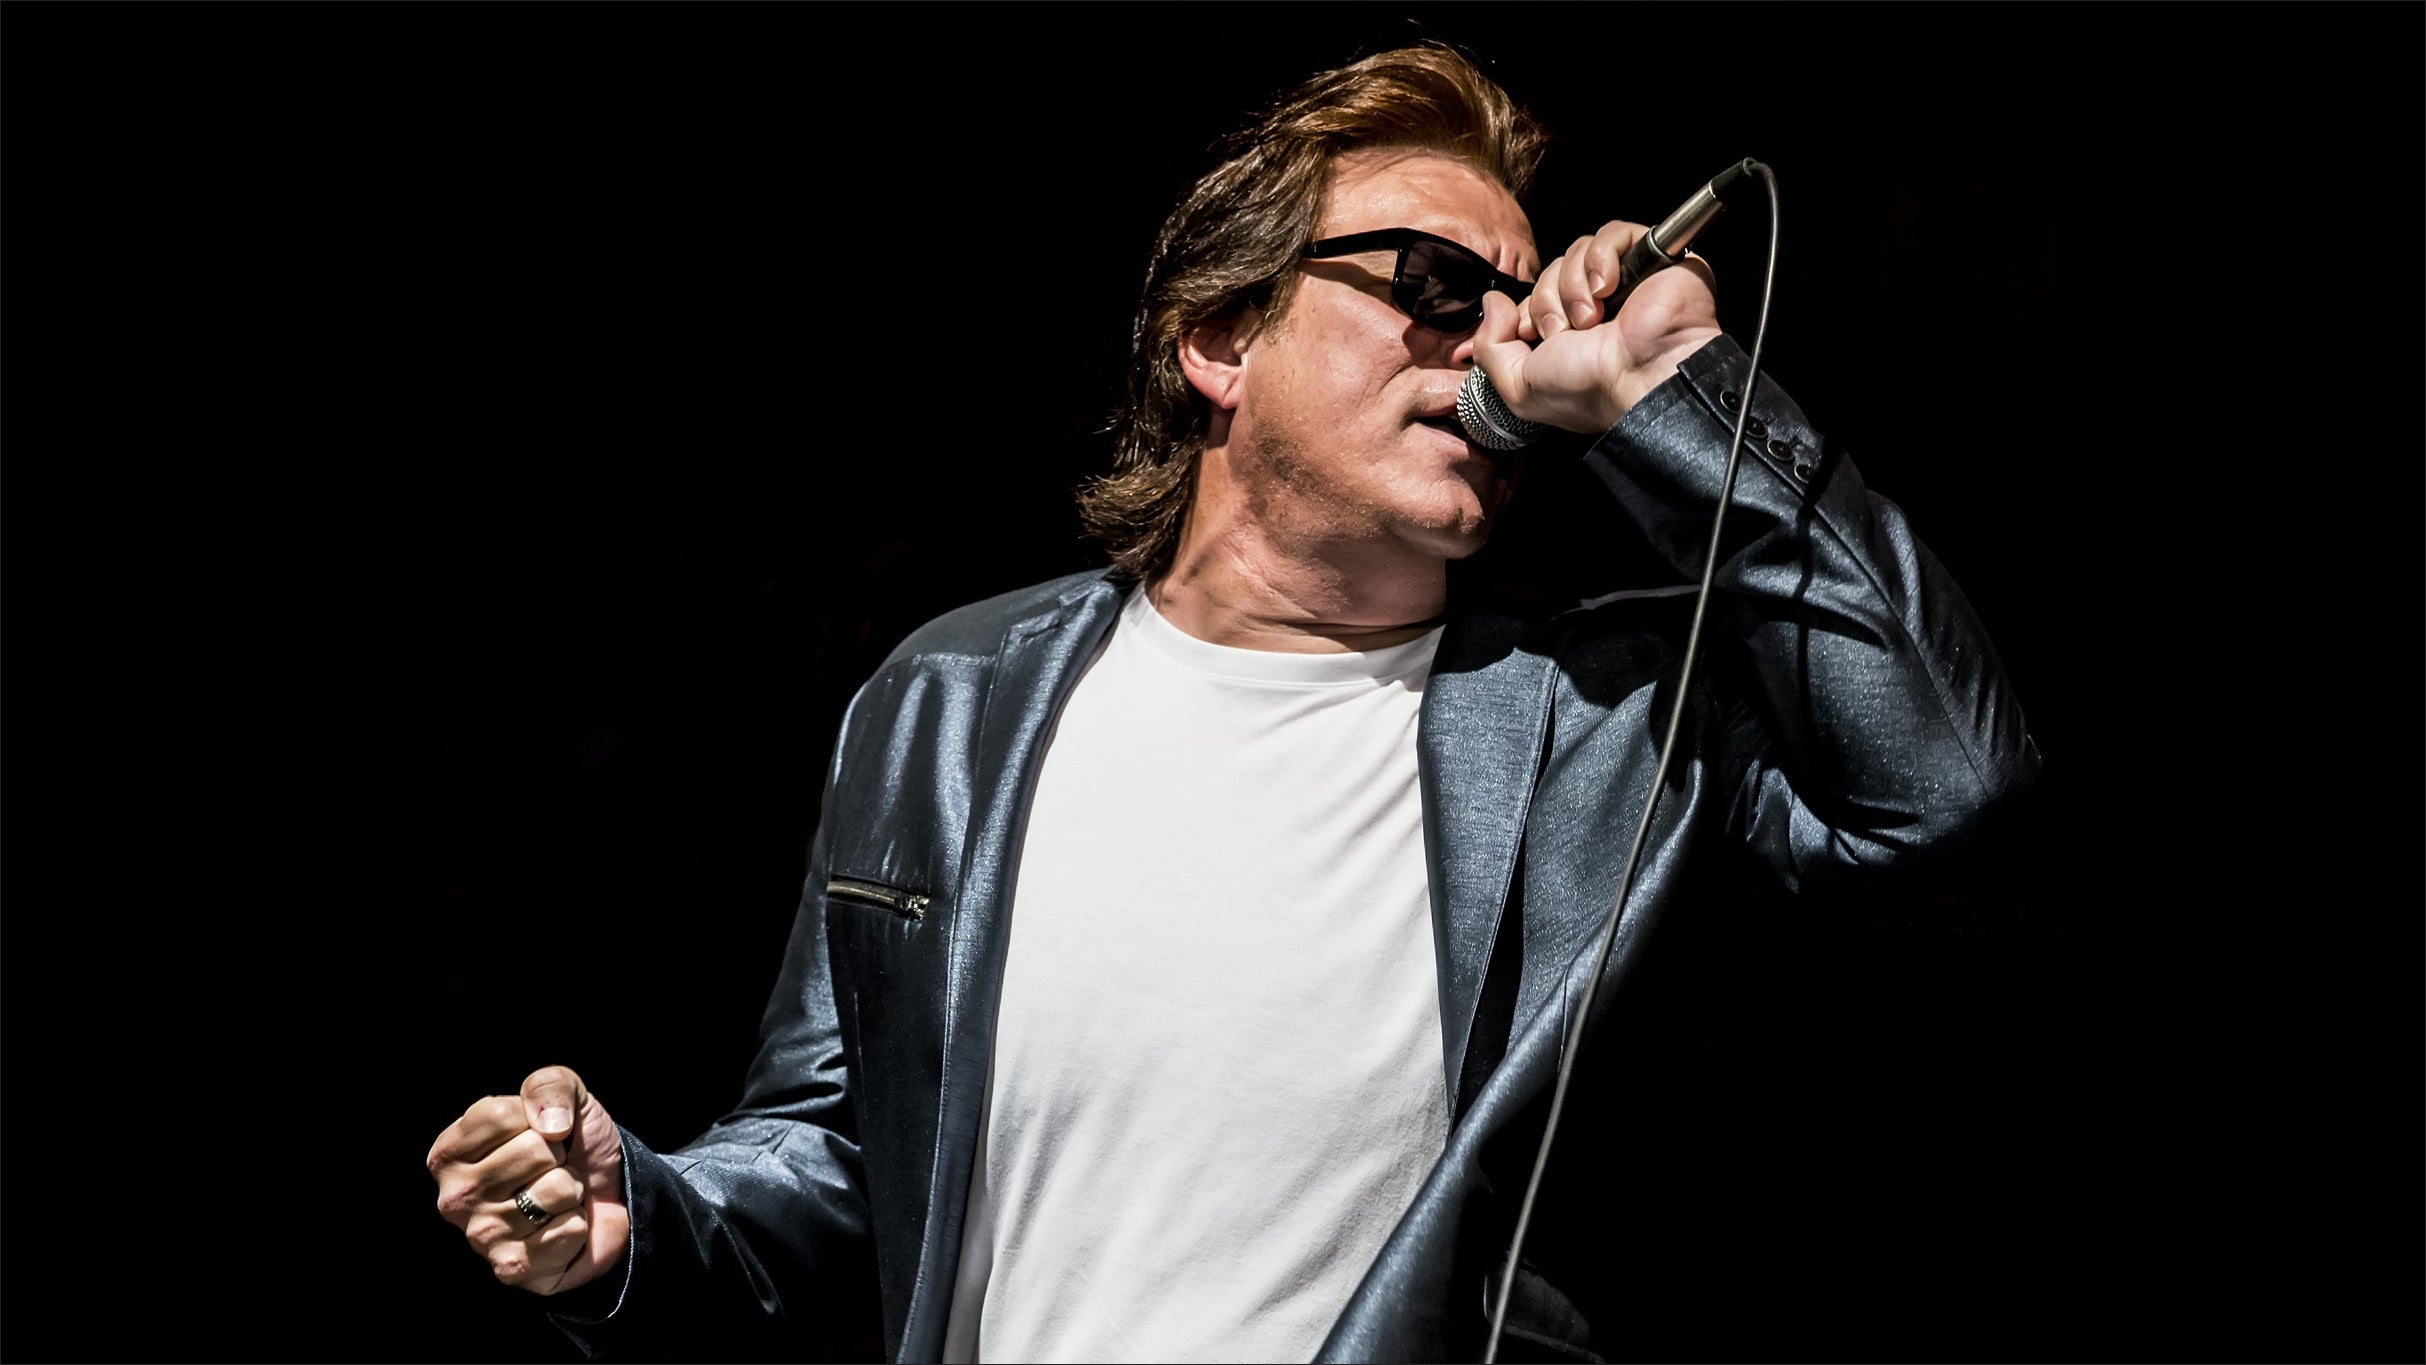 The Heart Of Rock & Roll - A Tribute To Huey Lewis & The News in Huntington promo photo for Venue presale offer code